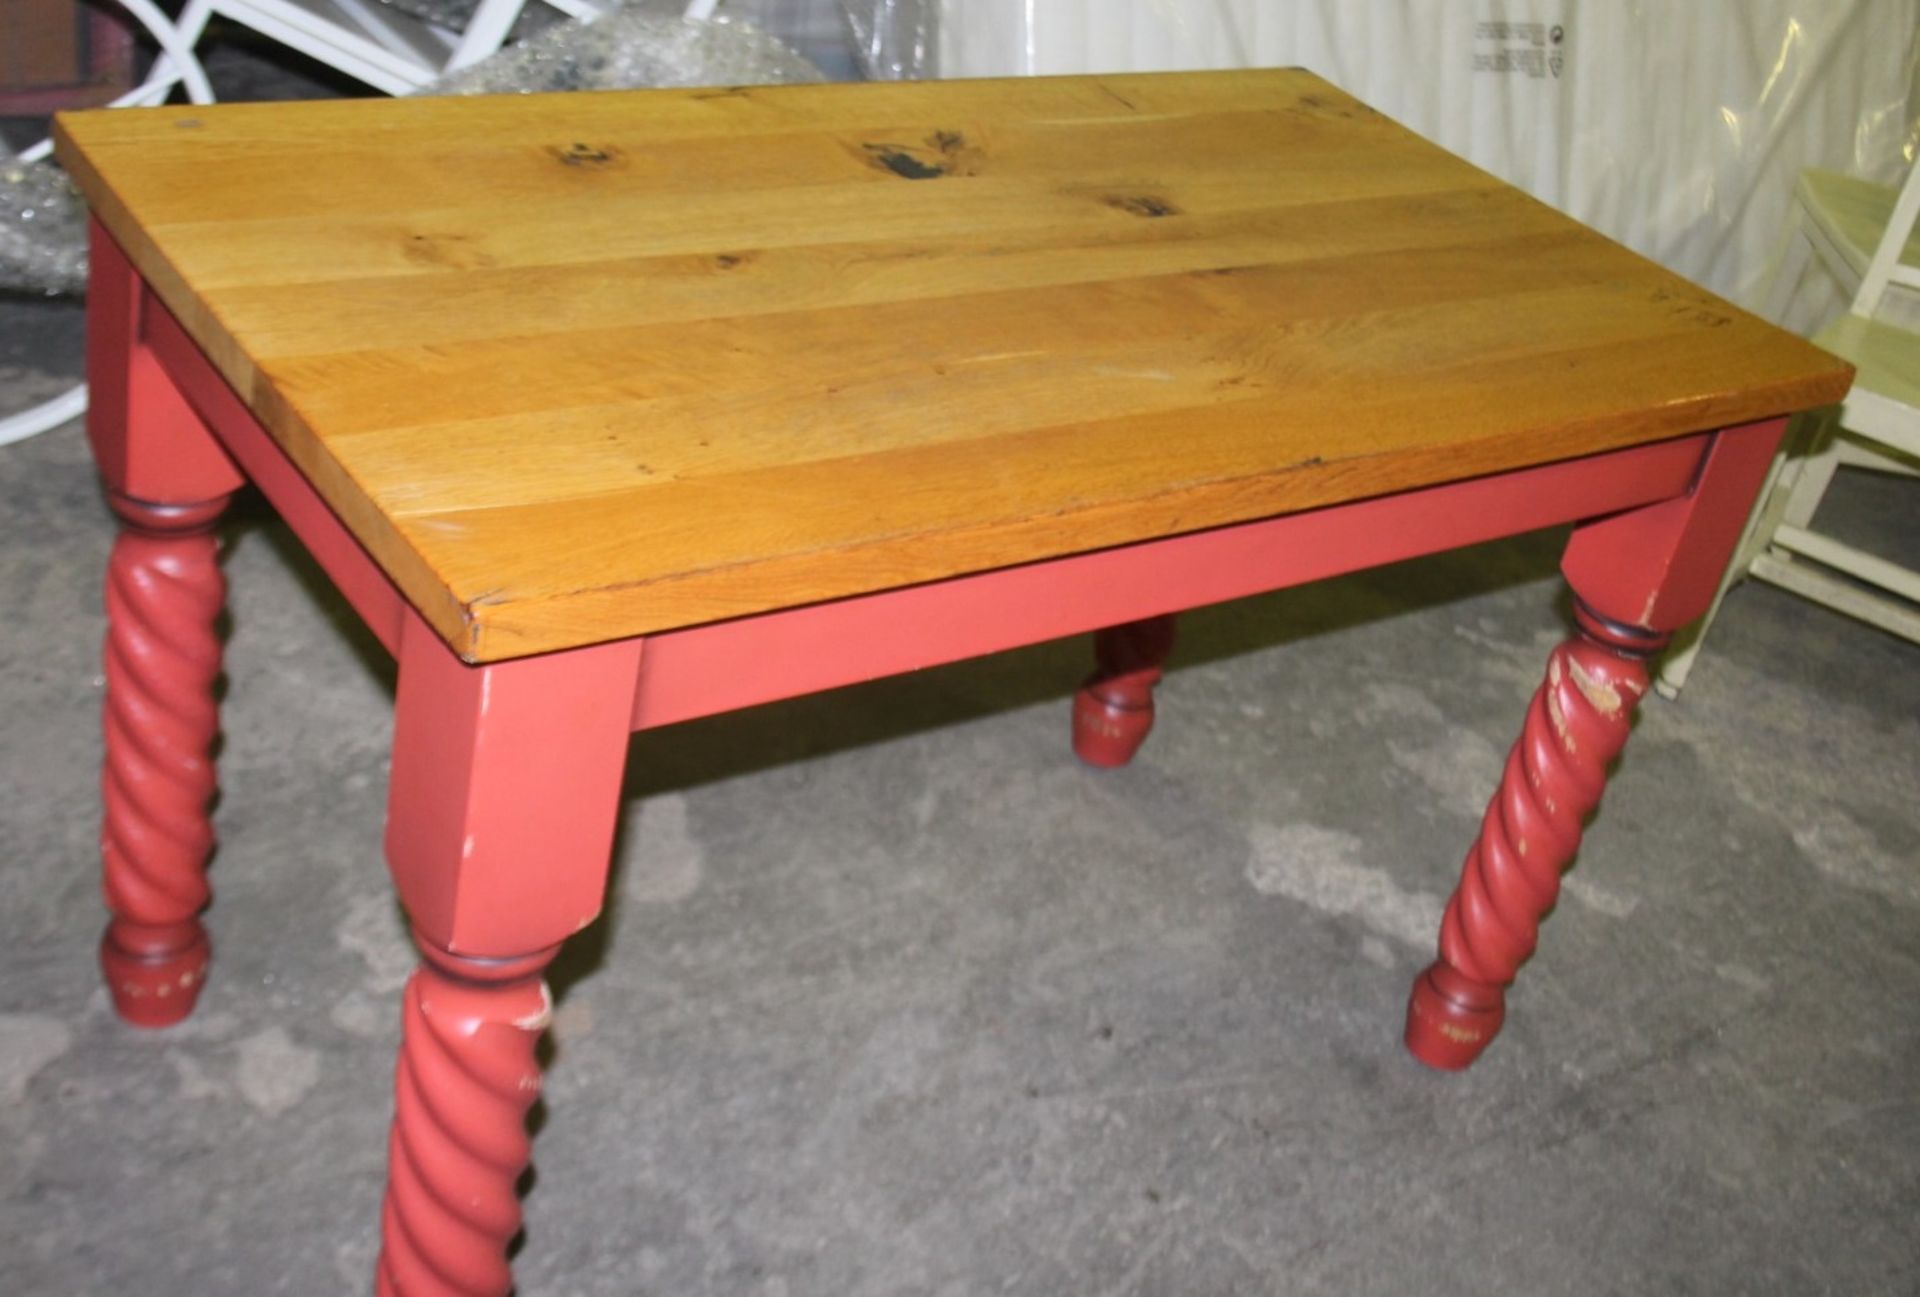 1 x Solid Wood Farmhouse Dining Table in Red With 4 x Chairs - Features A Solid Oak Table Top - Image 5 of 6